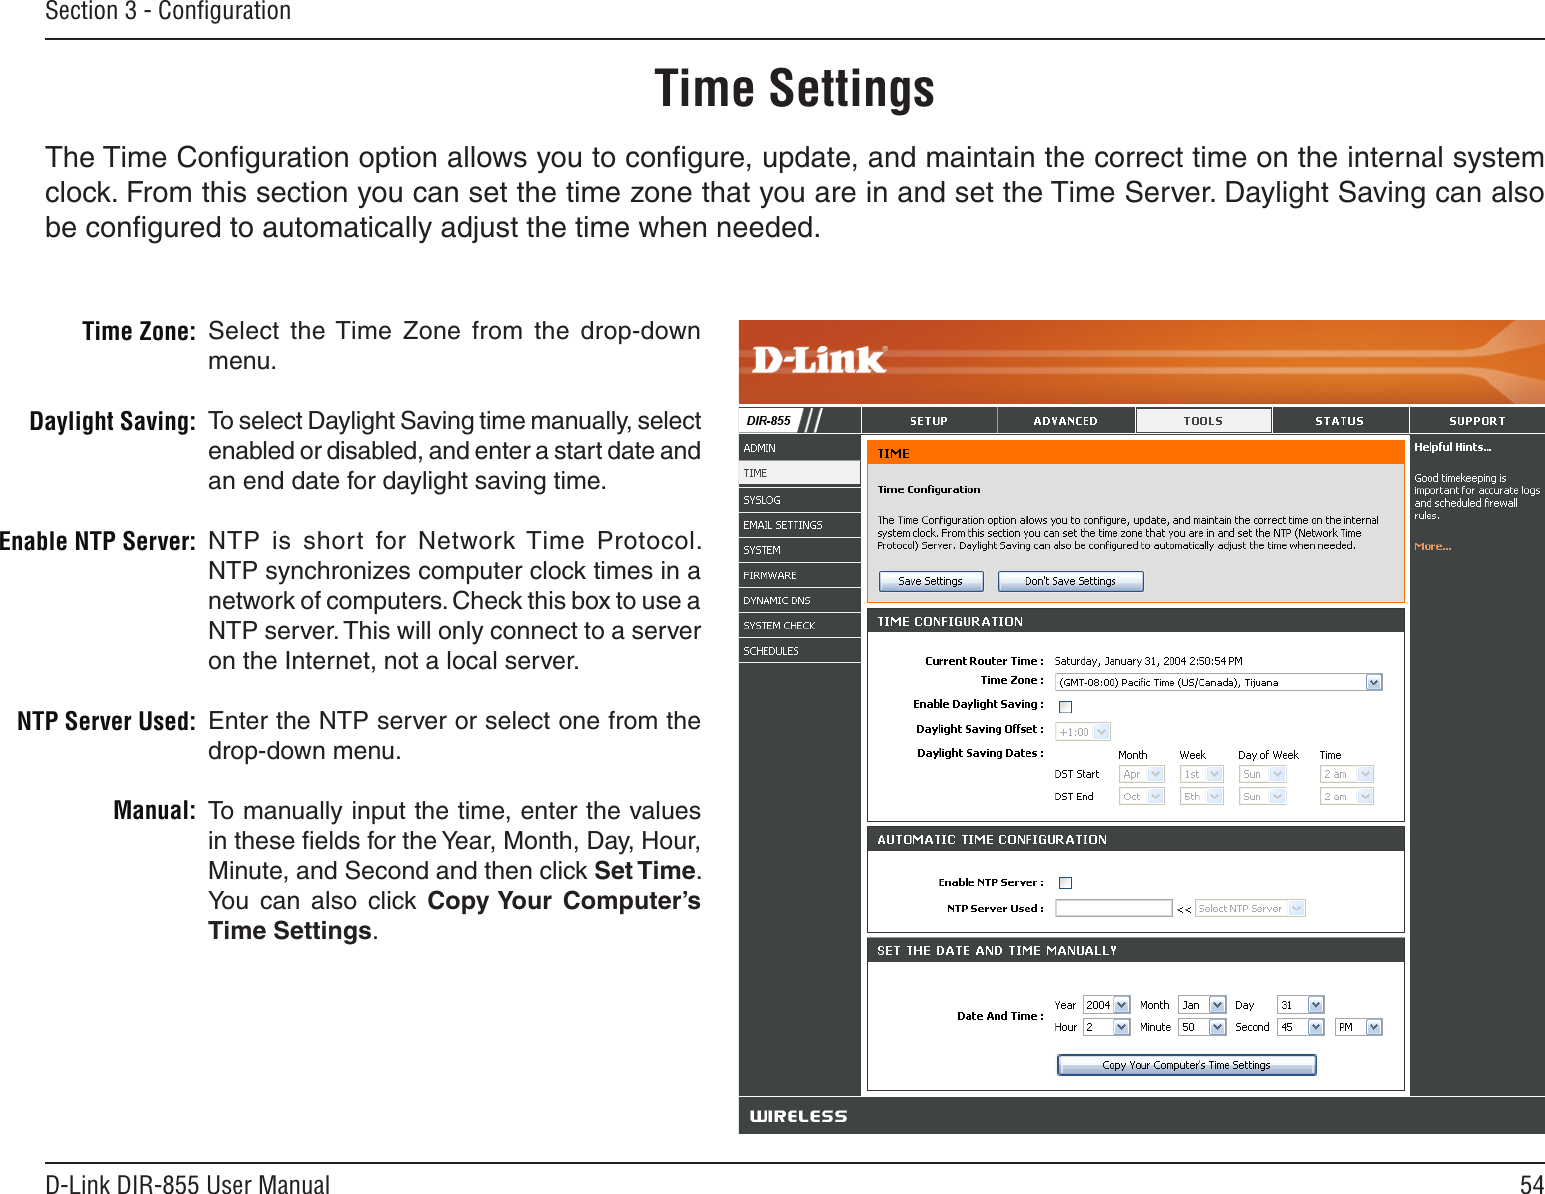 54D-Link DIR-855 User ManualSection 3 - ConﬁgurationTime SettingsSelect  the Time  Zone  from  the  drop-down menu.To select Daylight Saving time manually, select enabled or disabled, and enter a start date and an end date for daylight saving time.NTP  is  short  for  Network Time  Protocol. NTP synchronizes computer clock times in a network of computers. Check this box to use a NTP server. This will only connect to a server on the Internet, not a local server.Enter the NTP server or select one from the drop-down menu.To manually input the time, enter the values in these ﬁelds for the Year, Month, Day, Hour, Minute, and Second and then click Set Time. You  can  also  click  Copy Your  Computer’s Time Settings.Time Zone:Daylight Saving:Enable NTP Server:NTP Server Used:Manual:The Time Conﬁguration option allows you to conﬁgure, update, and maintain the correct time on the internal system clock. From this section you can set the time zone that you are in and set the Time Server. Daylight Saving can also be conﬁgured to automatically adjust the time when needed.